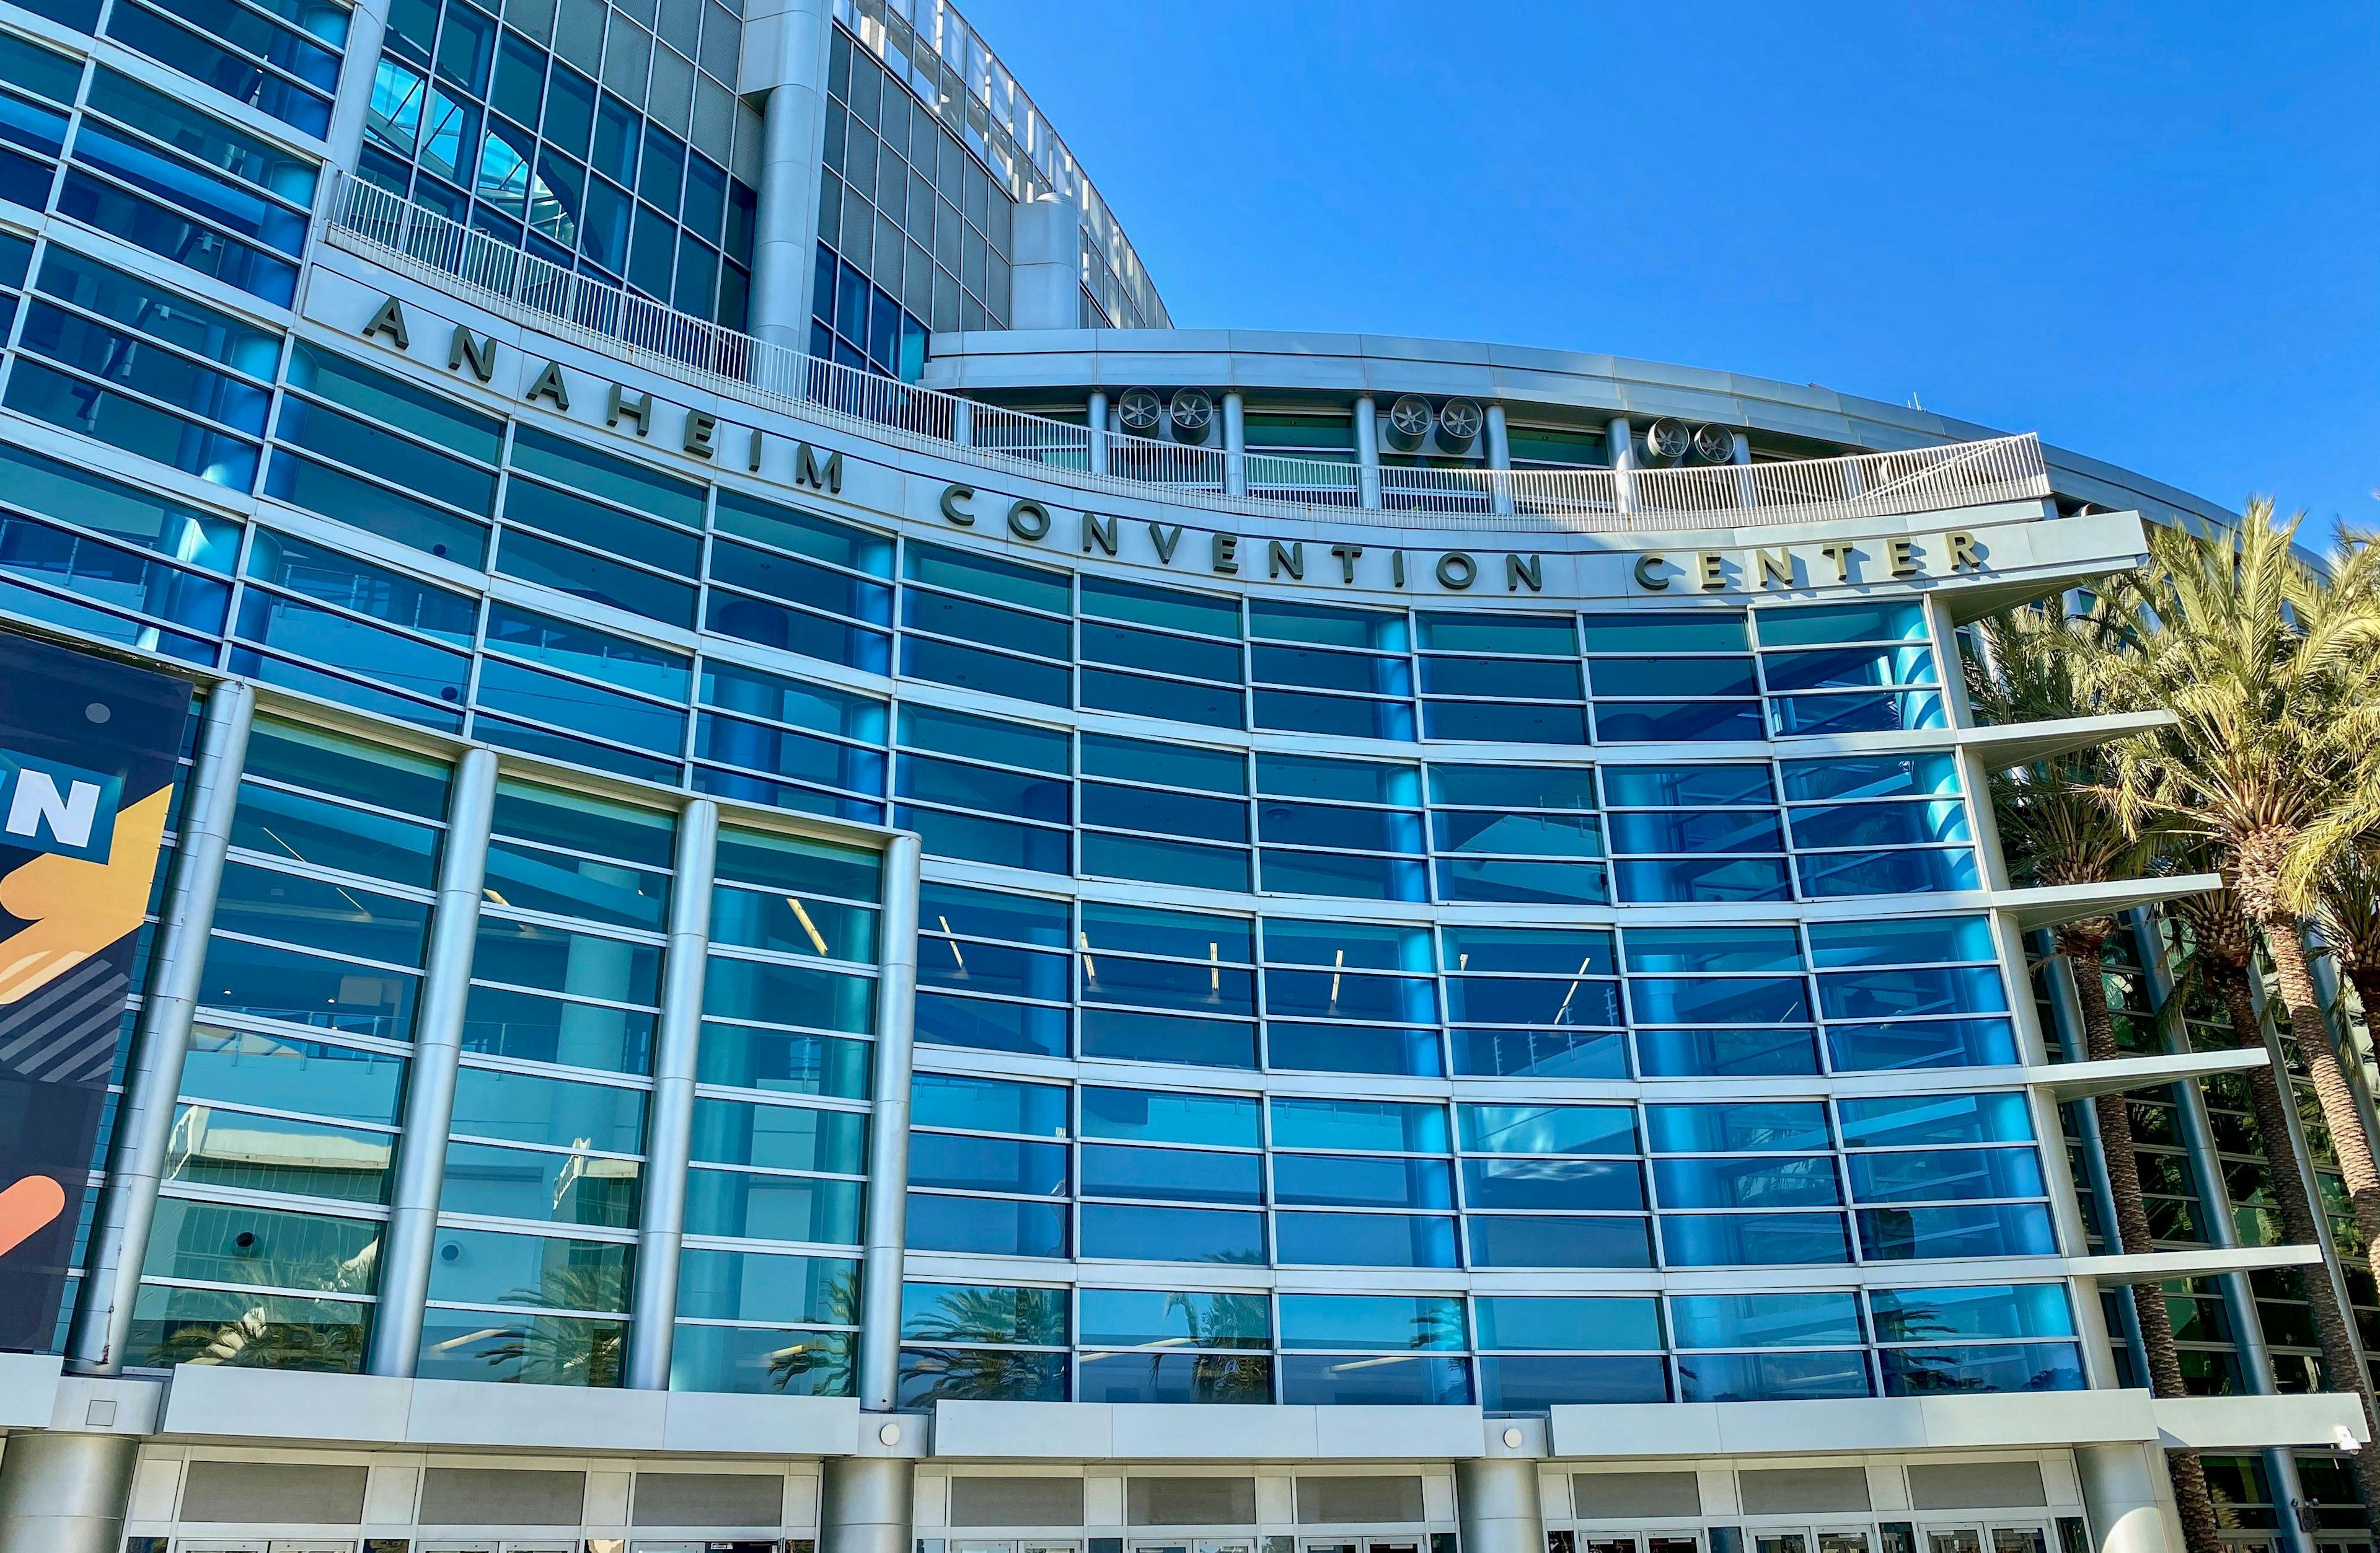 The 2024 ASMS conference will take place at the Anaheim Covention Center in Anaheim, California. © K KStock - stock.adobe.com